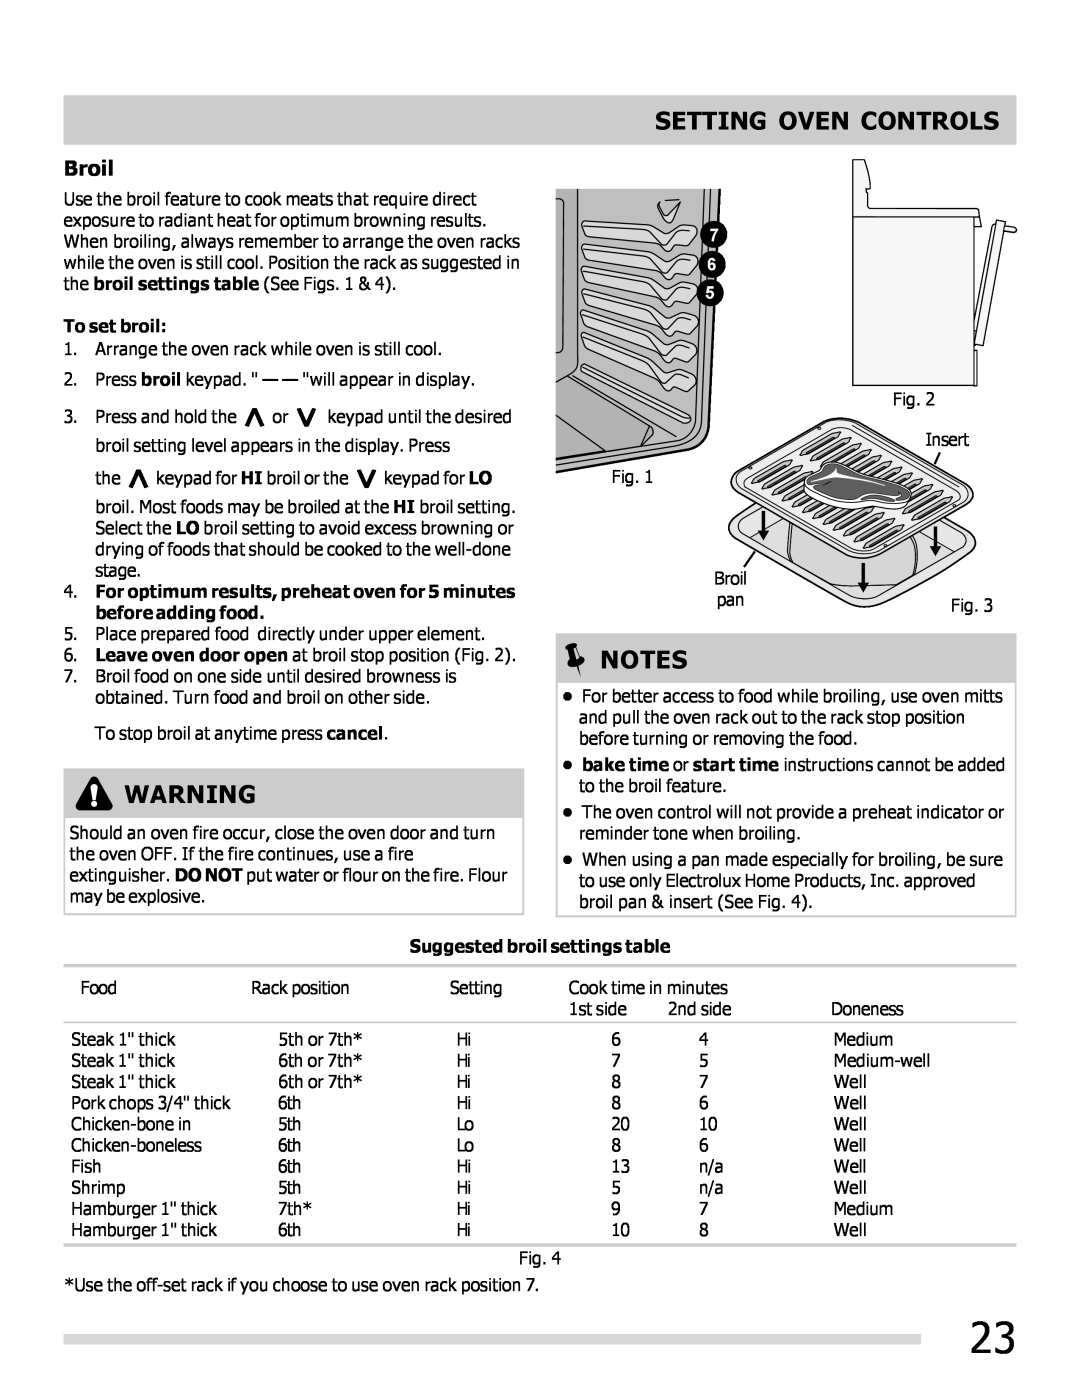 Frigidaire DGEF3041KF, FGEF3032MW, FGEF3032MB Broil, Setting Oven Controls, To set broil, Suggested broil settings table 